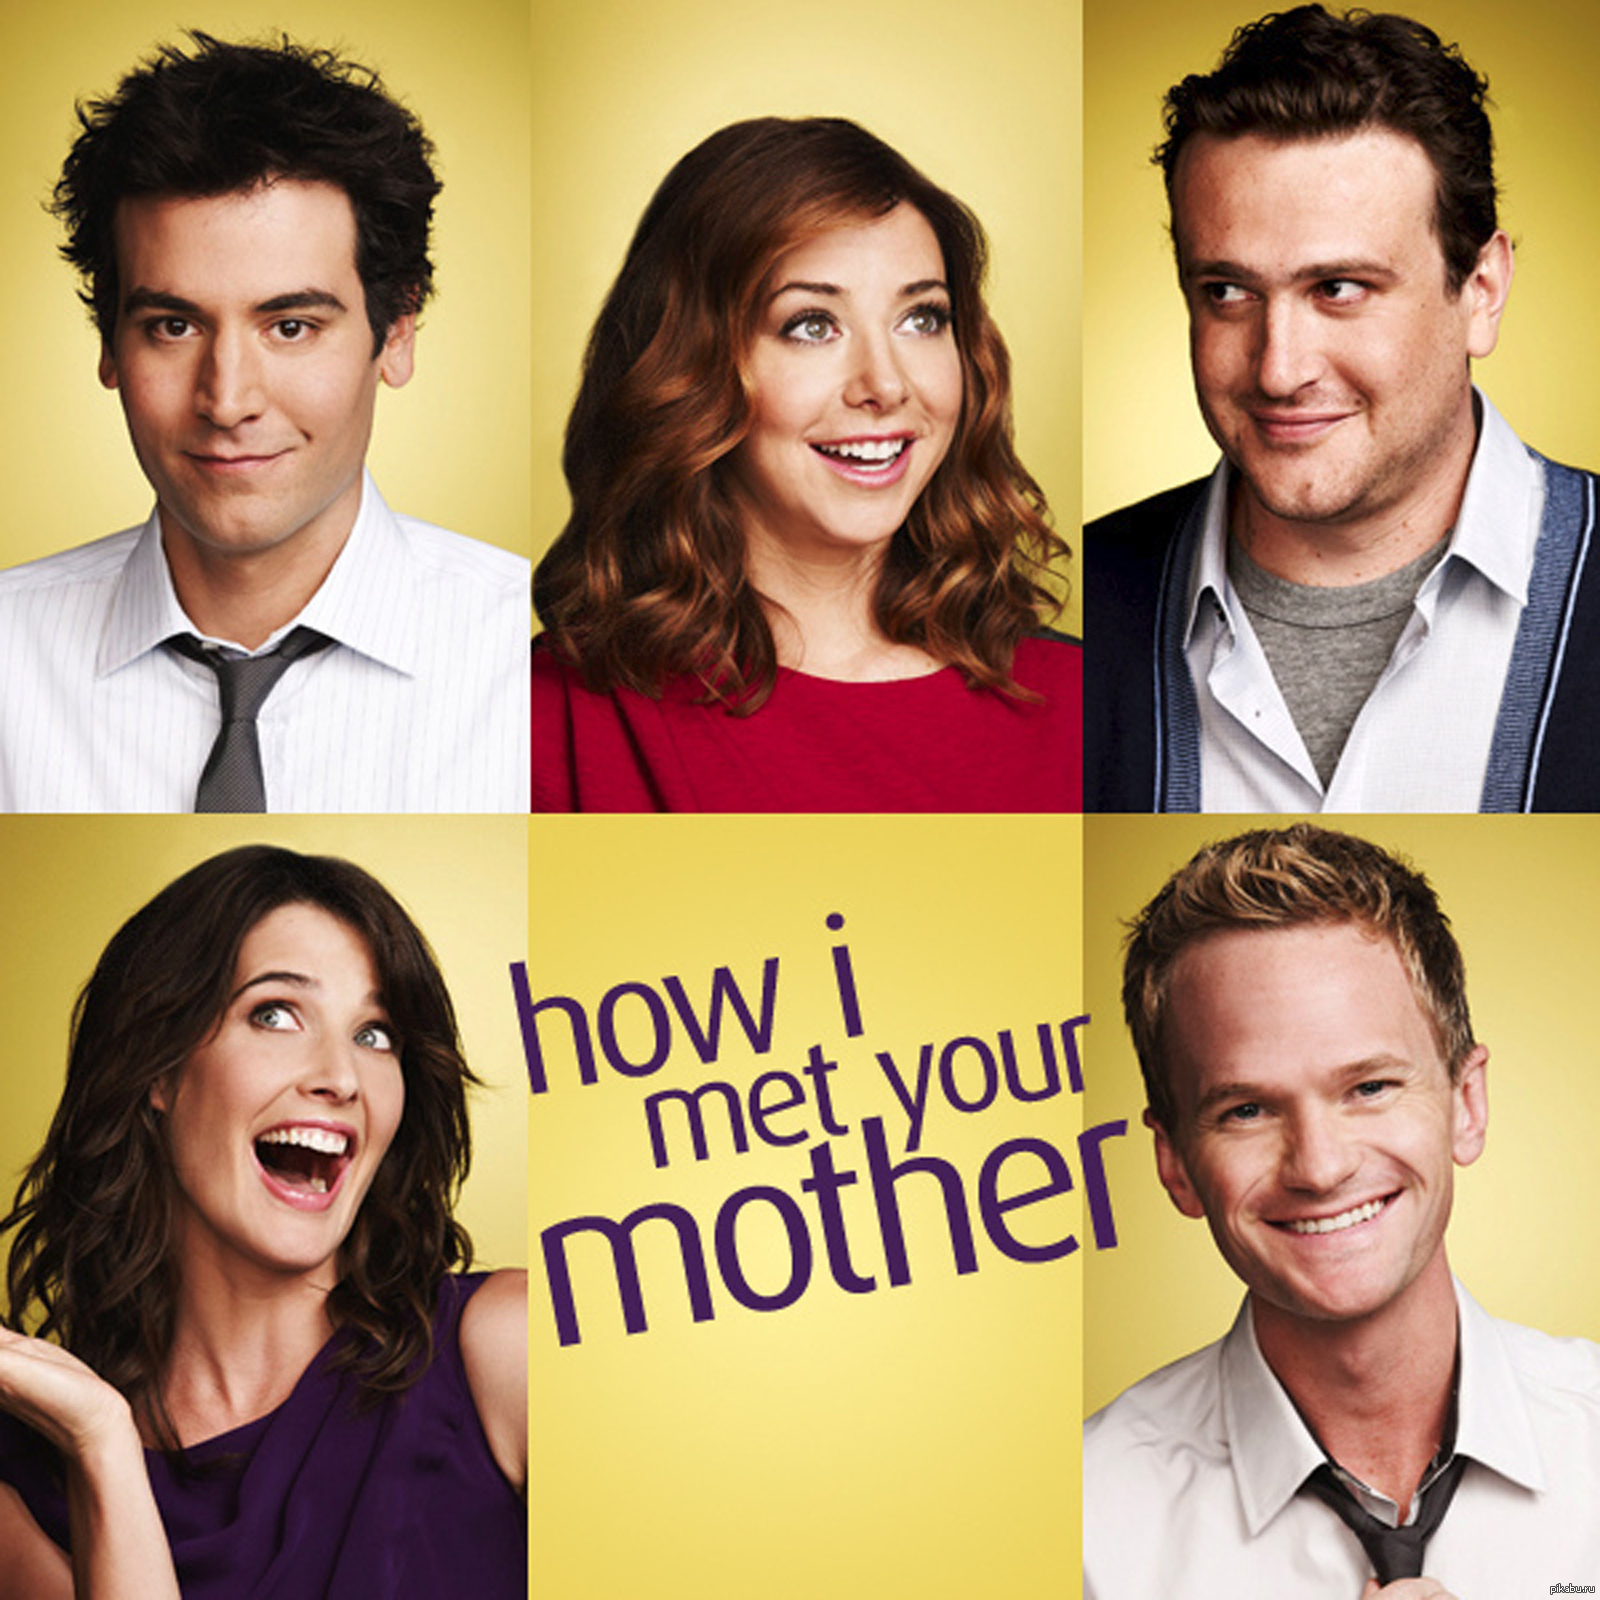 Rfr z c. How i met your mother poster.